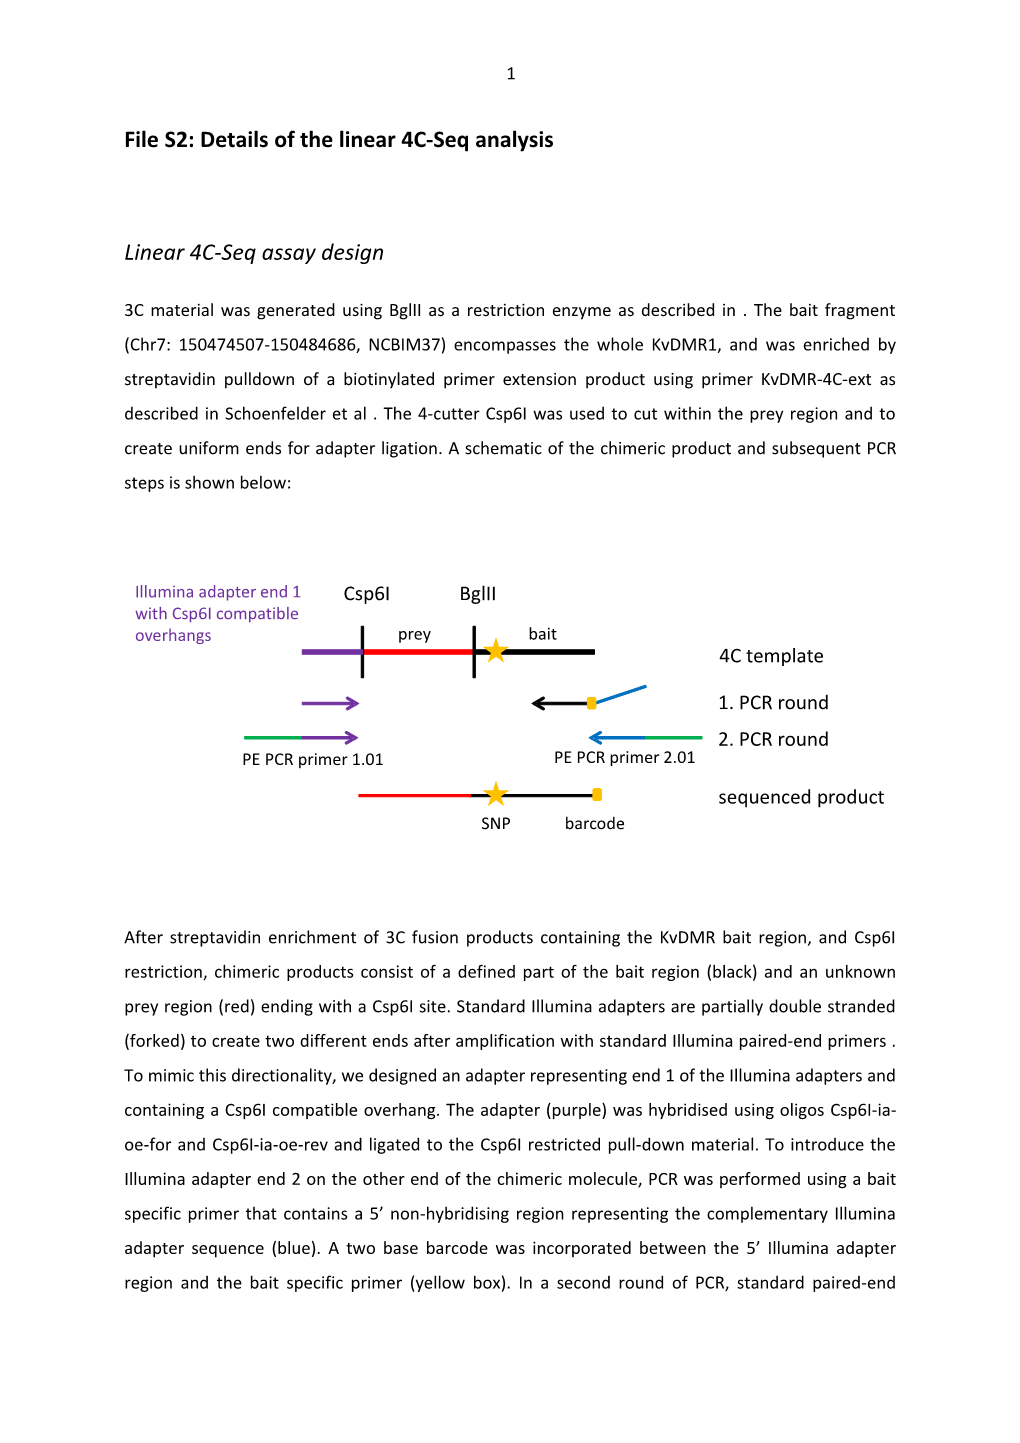 Files2: Details of the Linear 4C-Seq Analysis